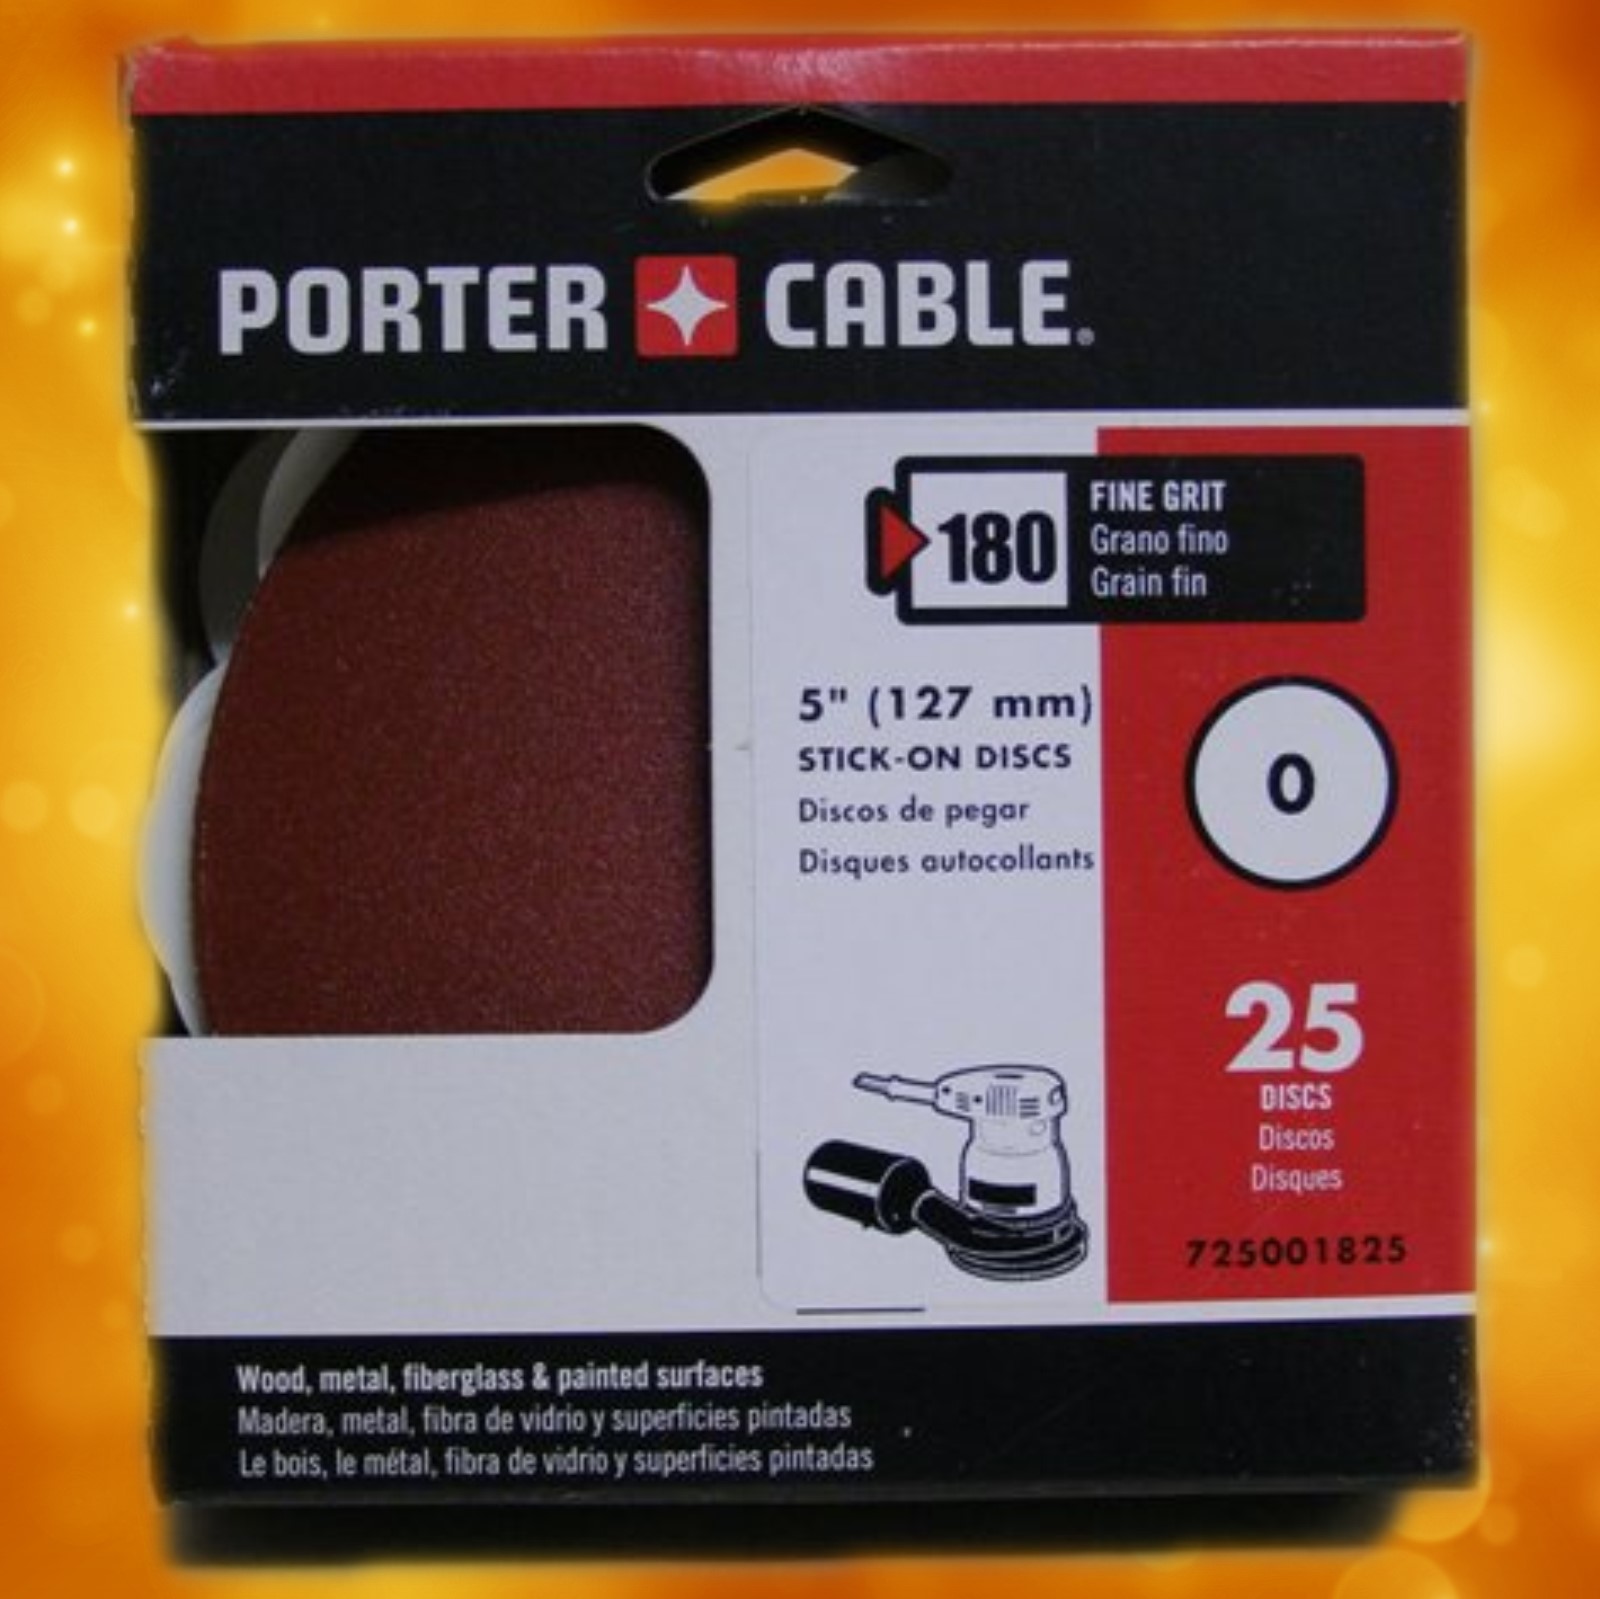 Porter-Cable 5" No-Hole, Adhesive-Backed Sanding Discs - 150 Grit (50 Pack) 725001550